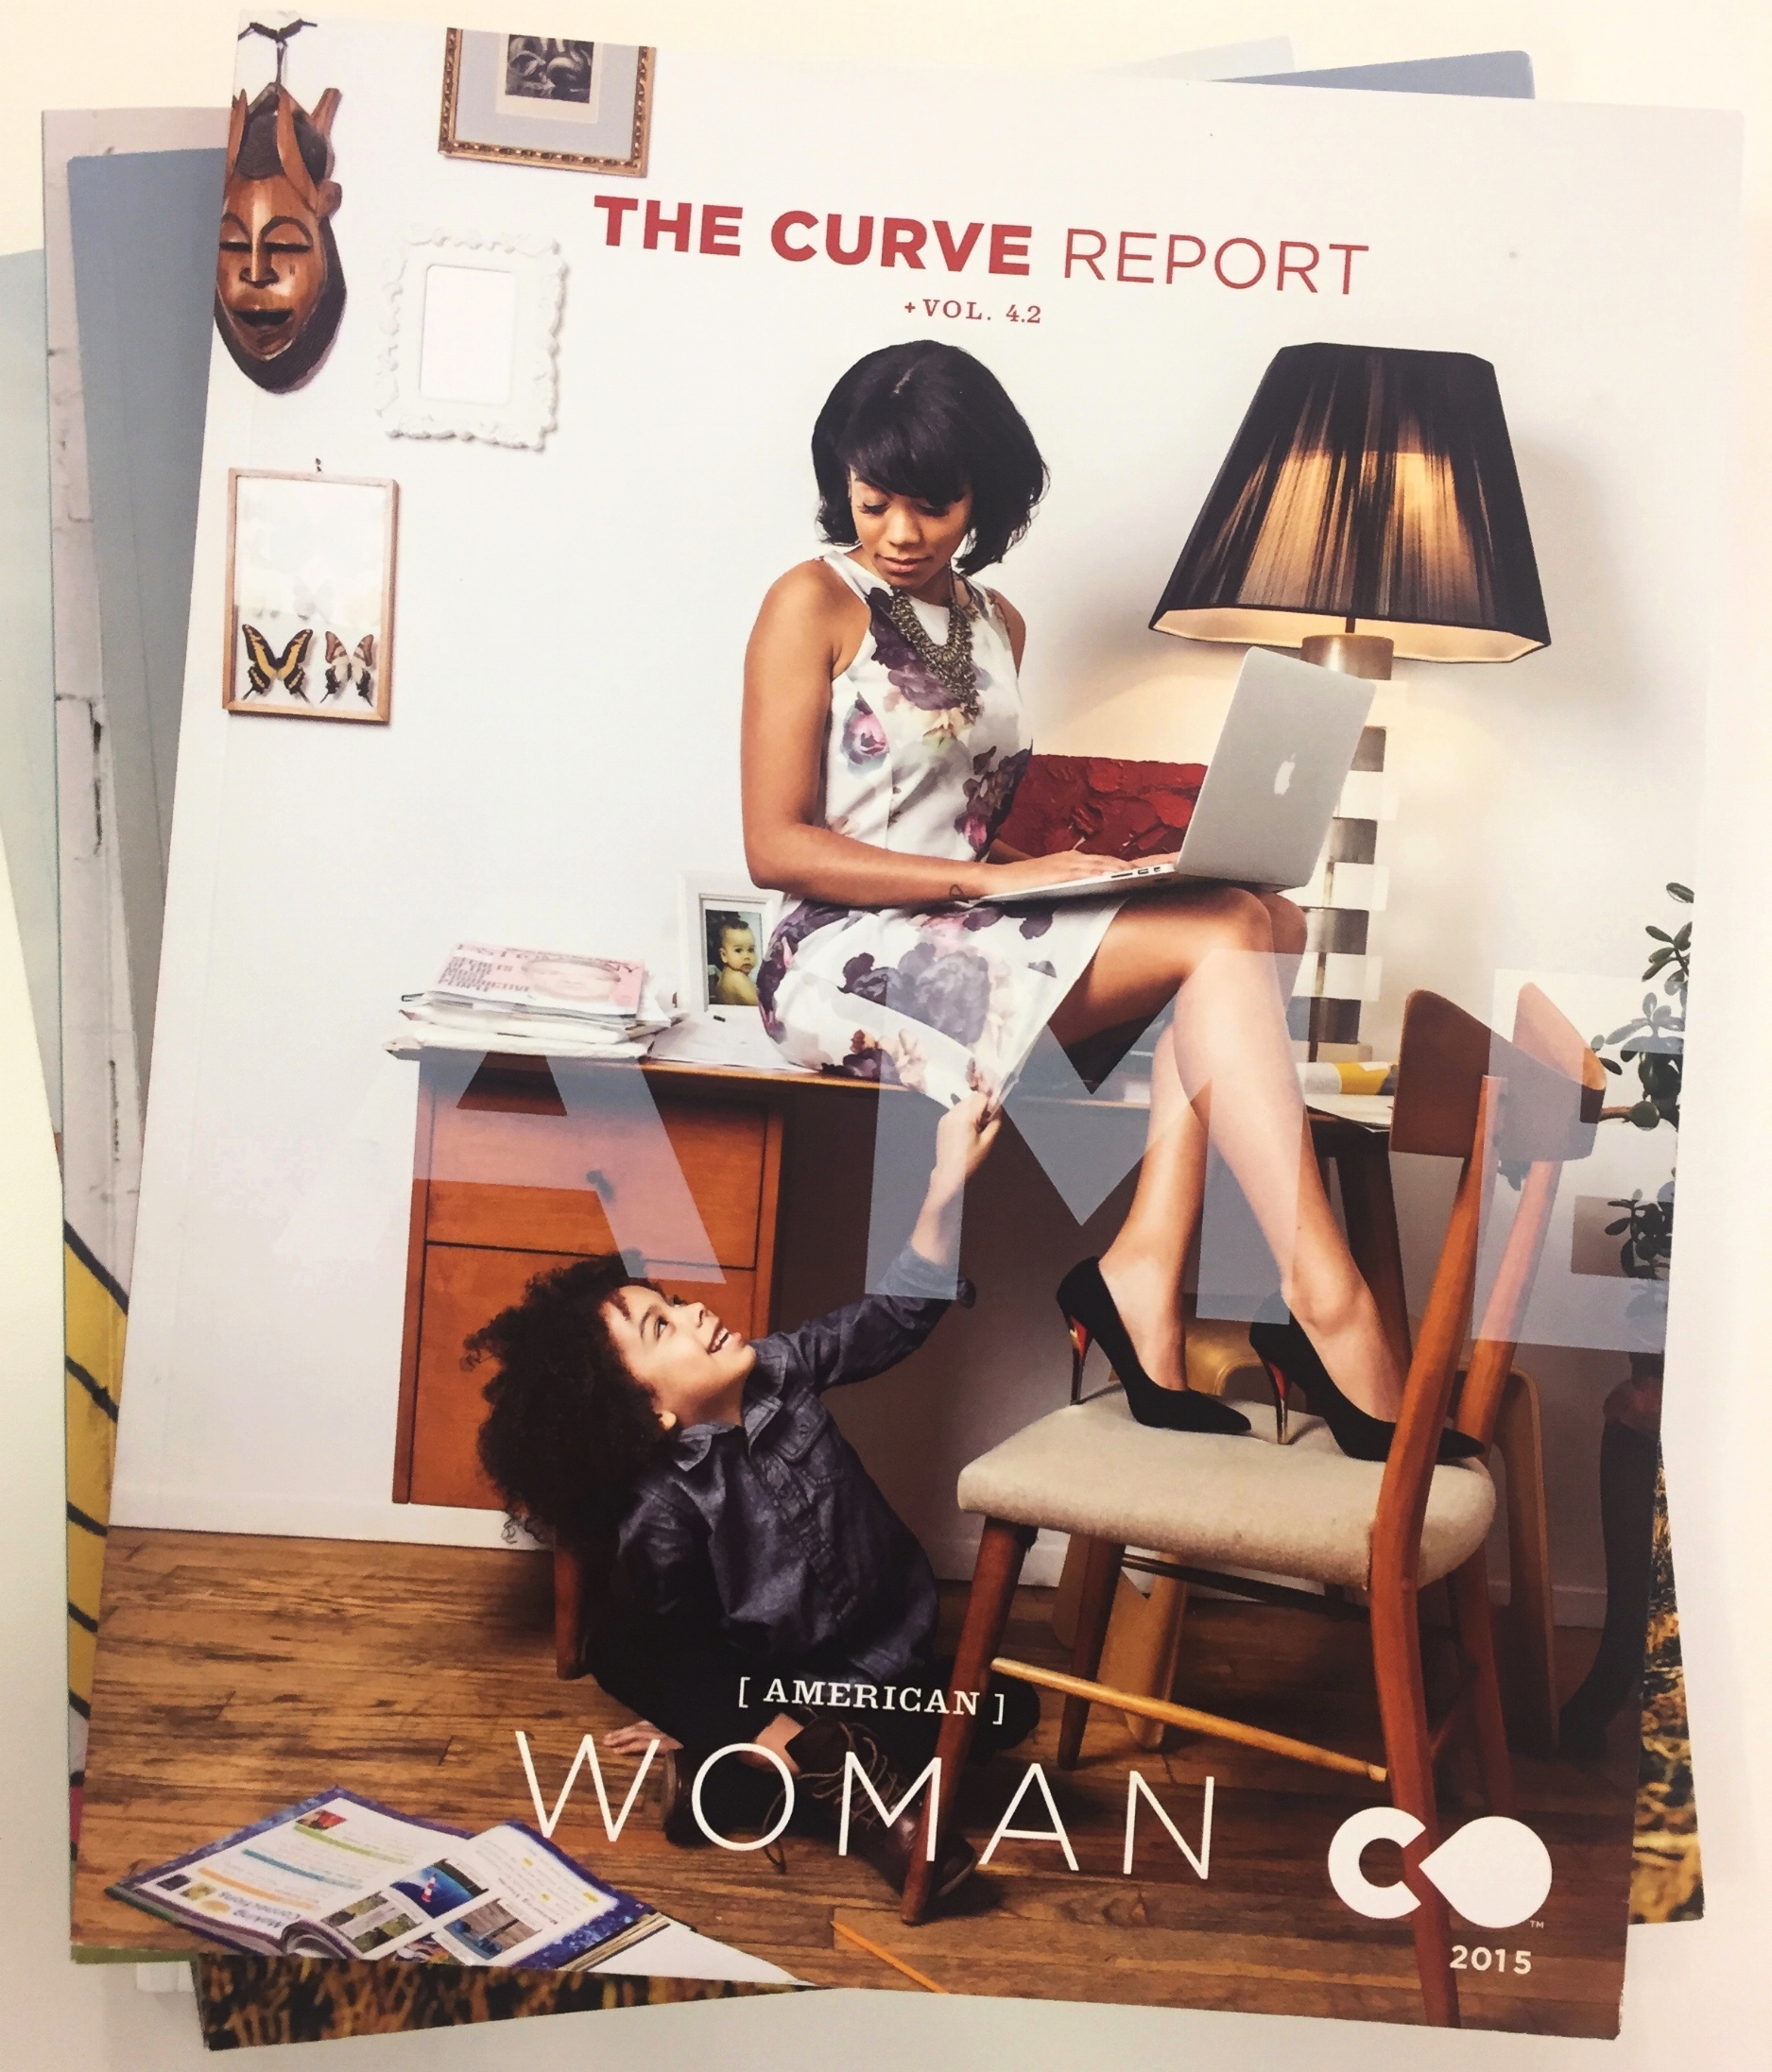 The Curve Report